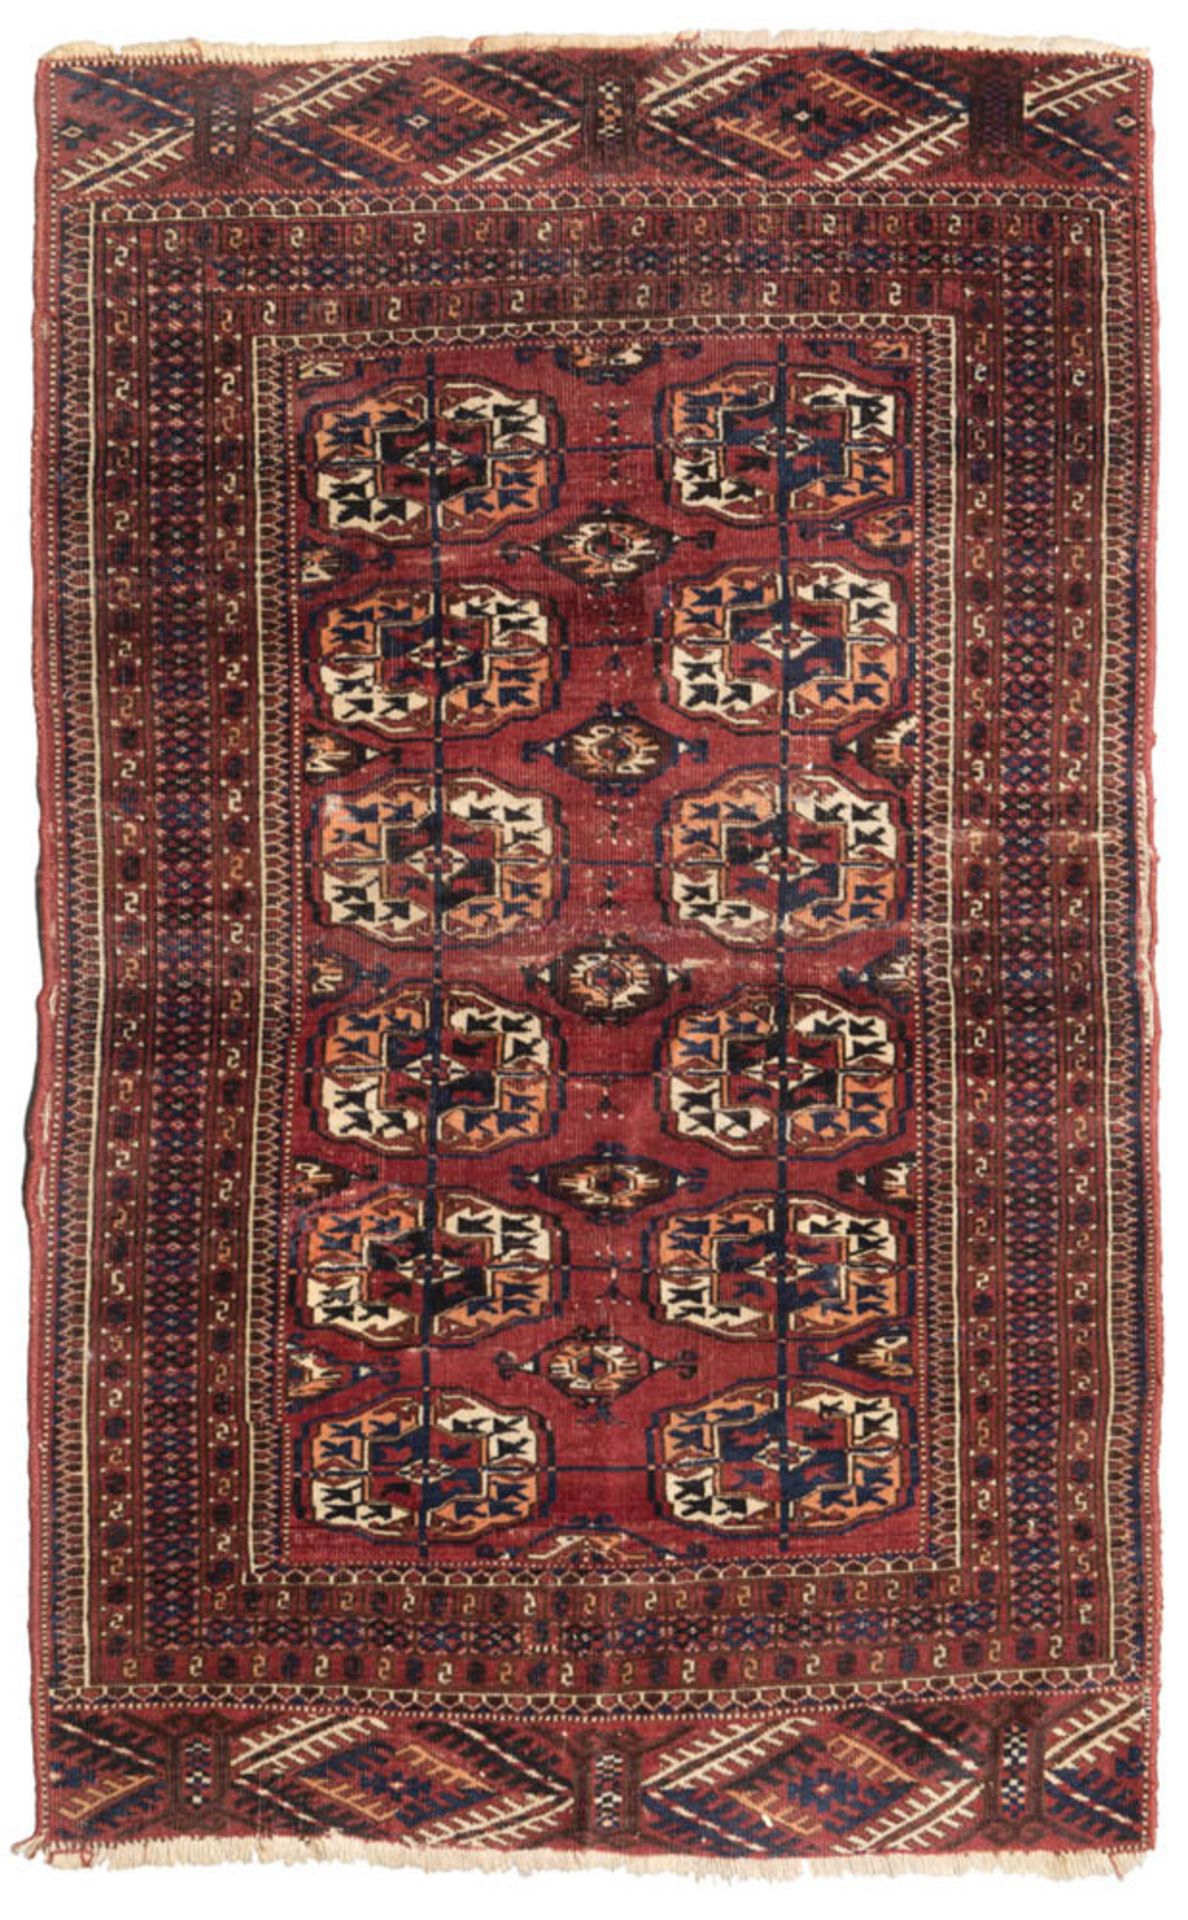 SMALL RUSSIAN BOKARA CARPET, EARLY 20TH CENTURY with secondary motives of hexagons in the center